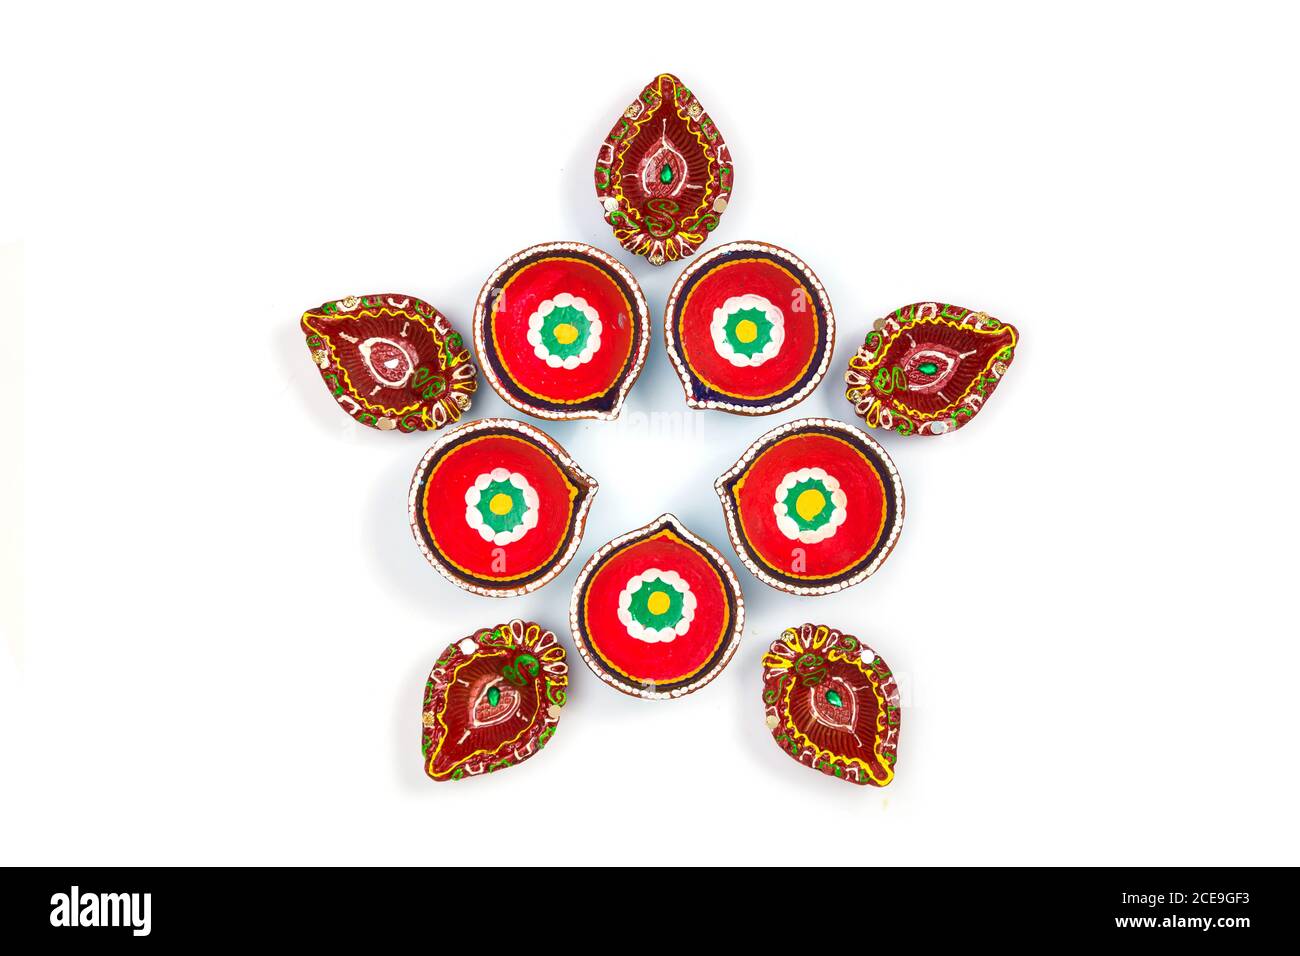 Happy Diwali - Clay Diya lamps lit during Dipavali, Hindu festival of lights celebration. Colorful traditional oil lamp diya on white background. Copy Stock Photo